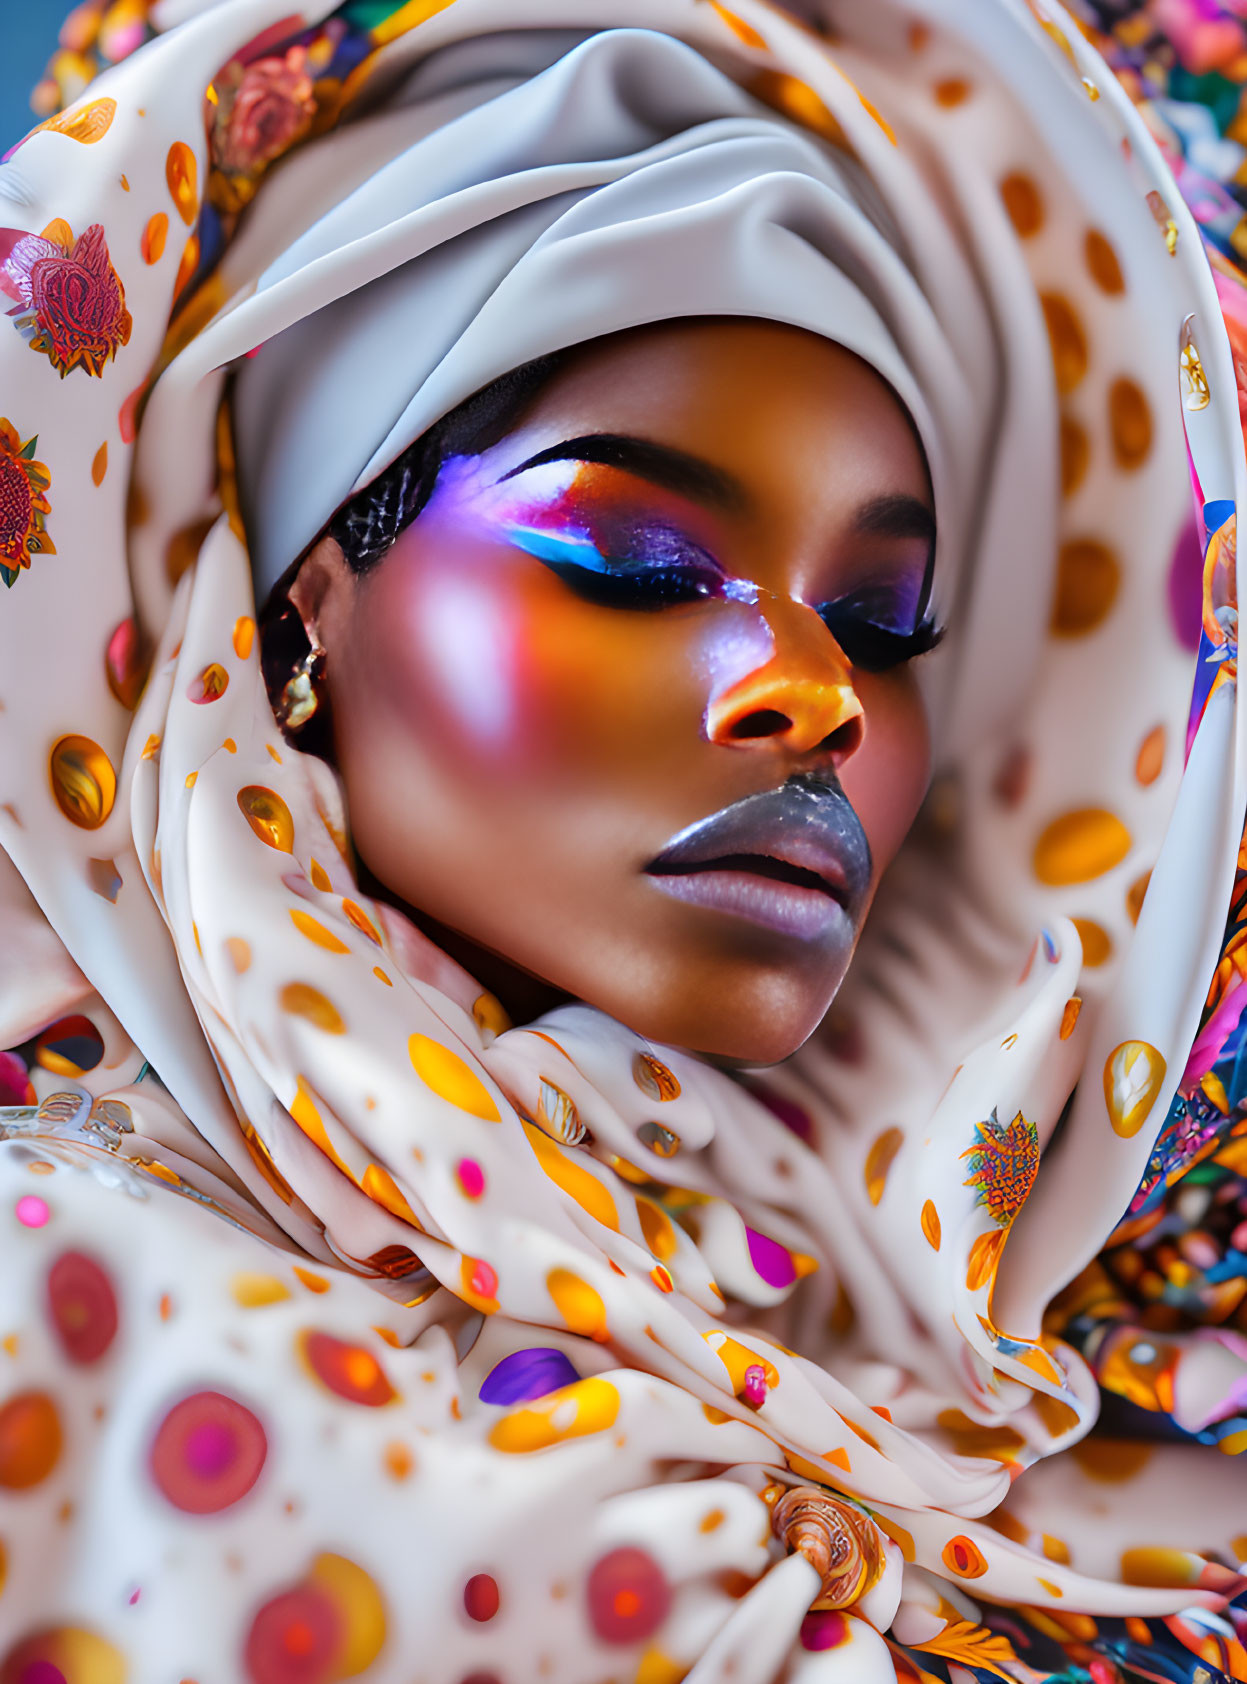 Vibrant Eye Makeup and Patterned Headscarf Portrait with High Color Saturation